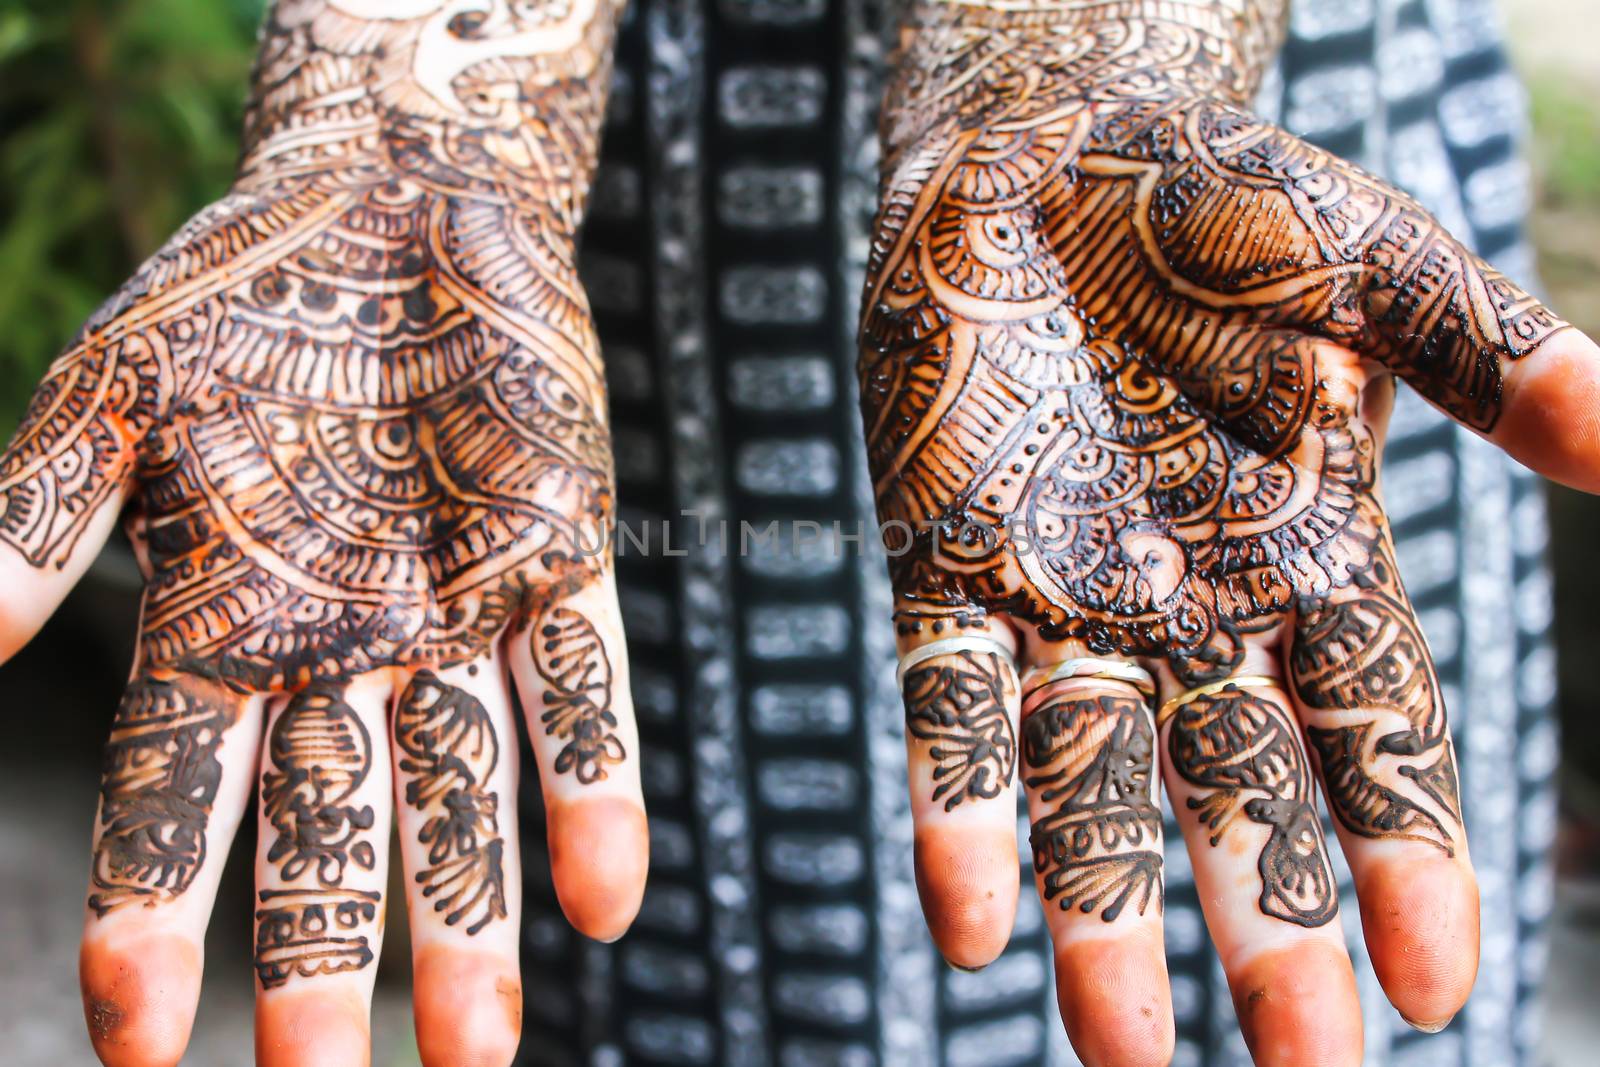 Henna is applied to the hands of a Hindu Bride